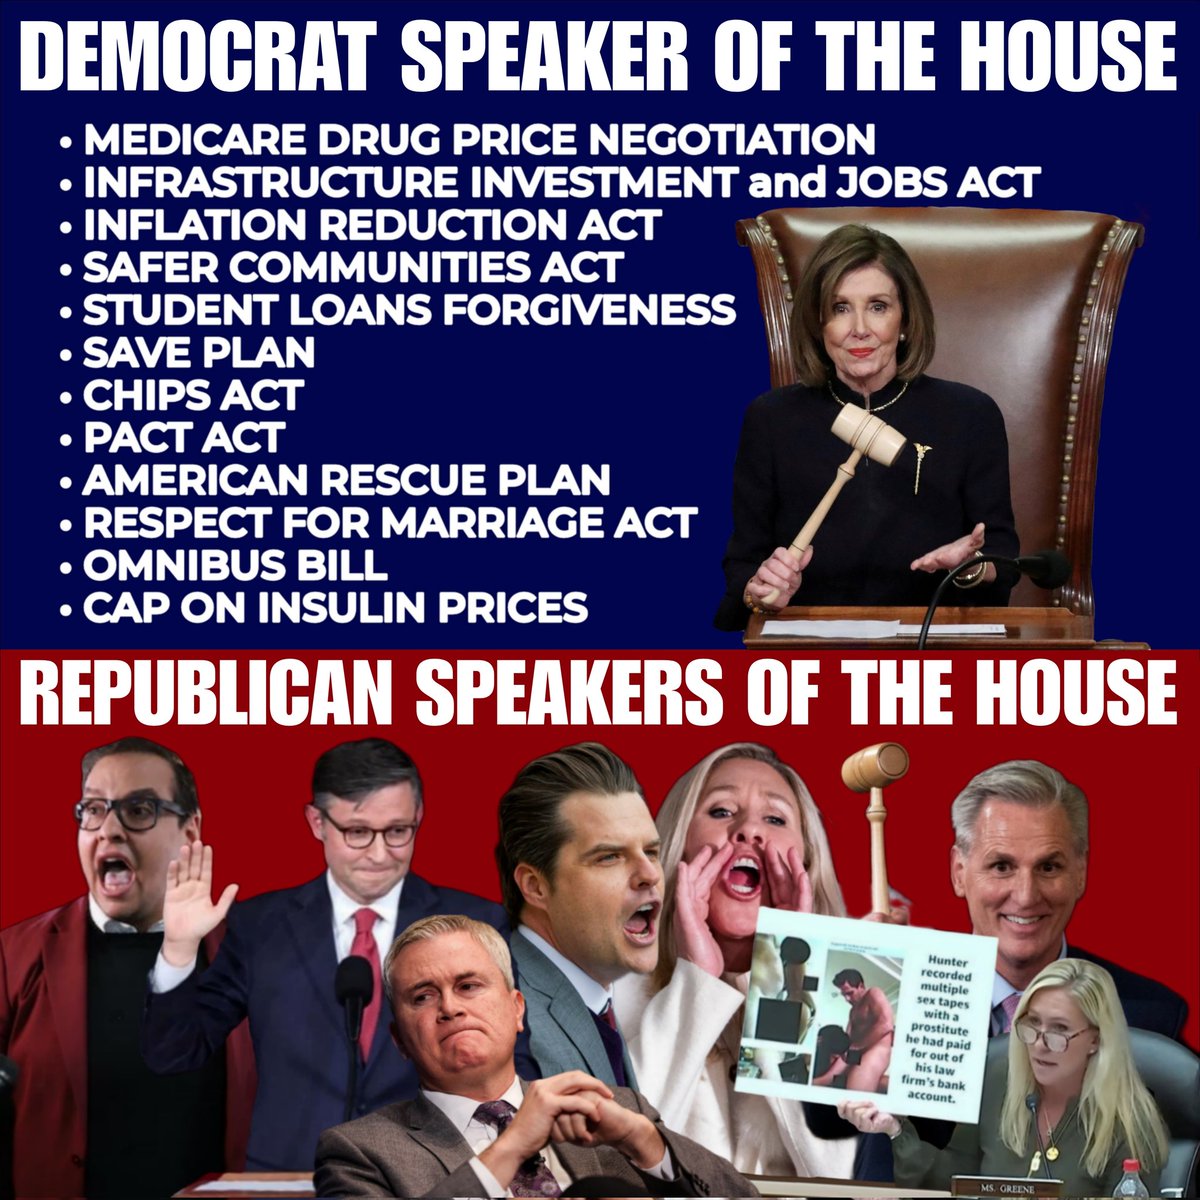 Speaker Of The House is trending because...